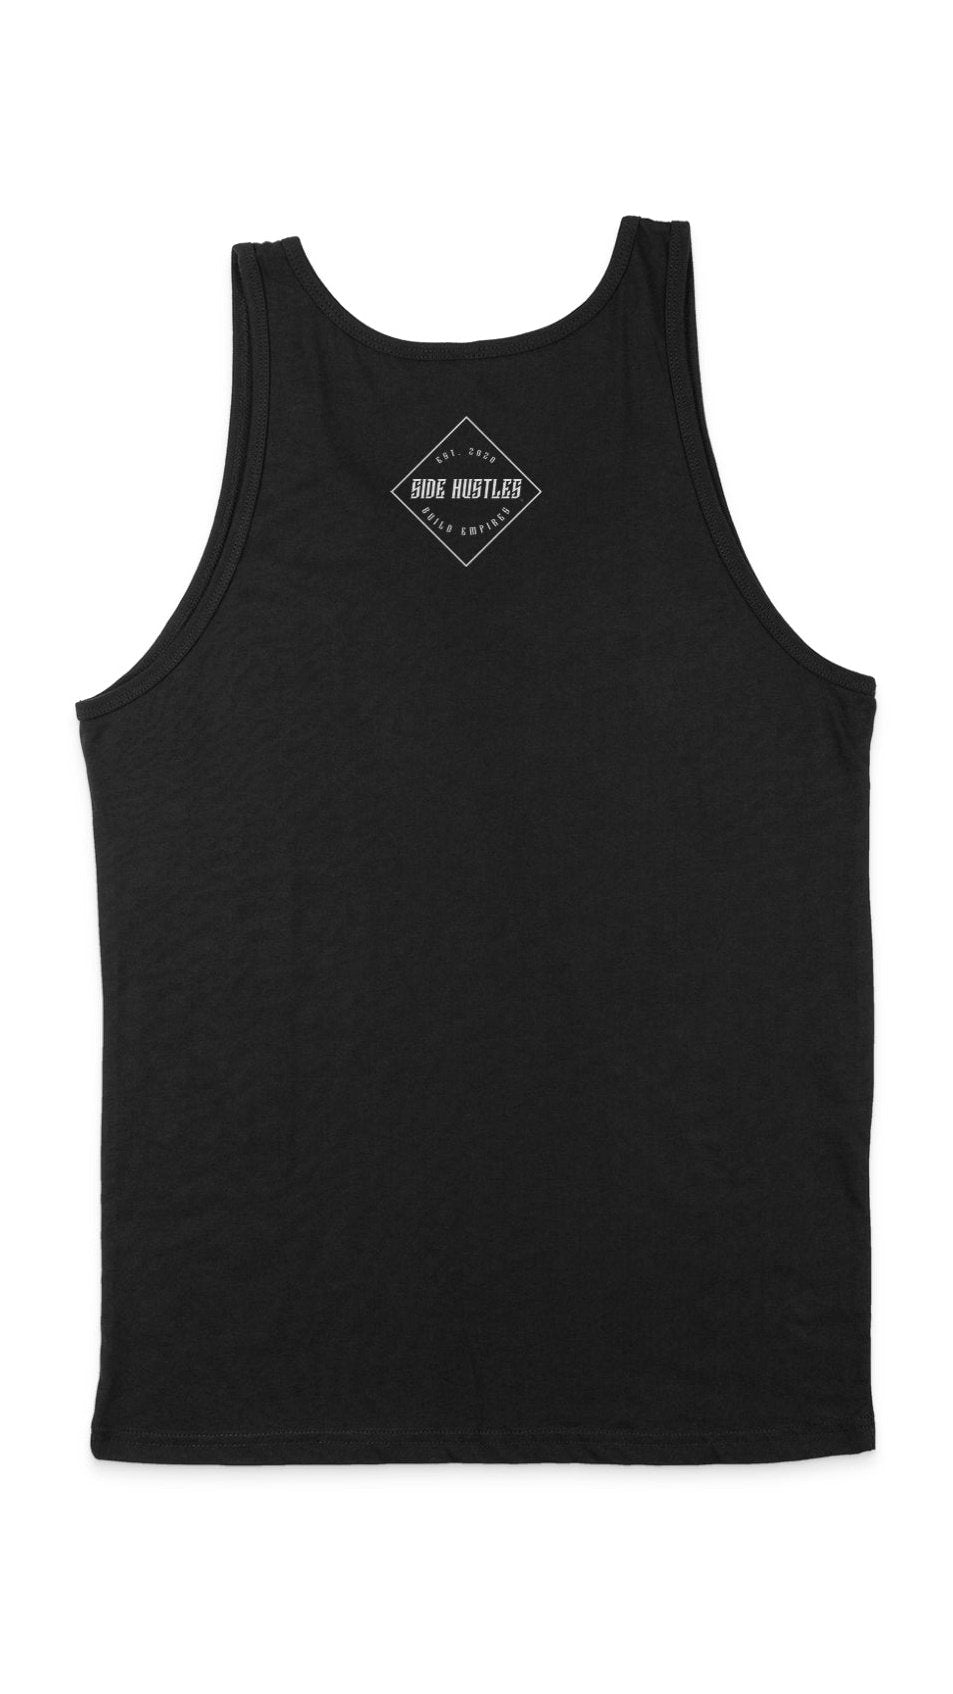 Black comfortable soft tank top with side hustle logo screen printed on lower left side